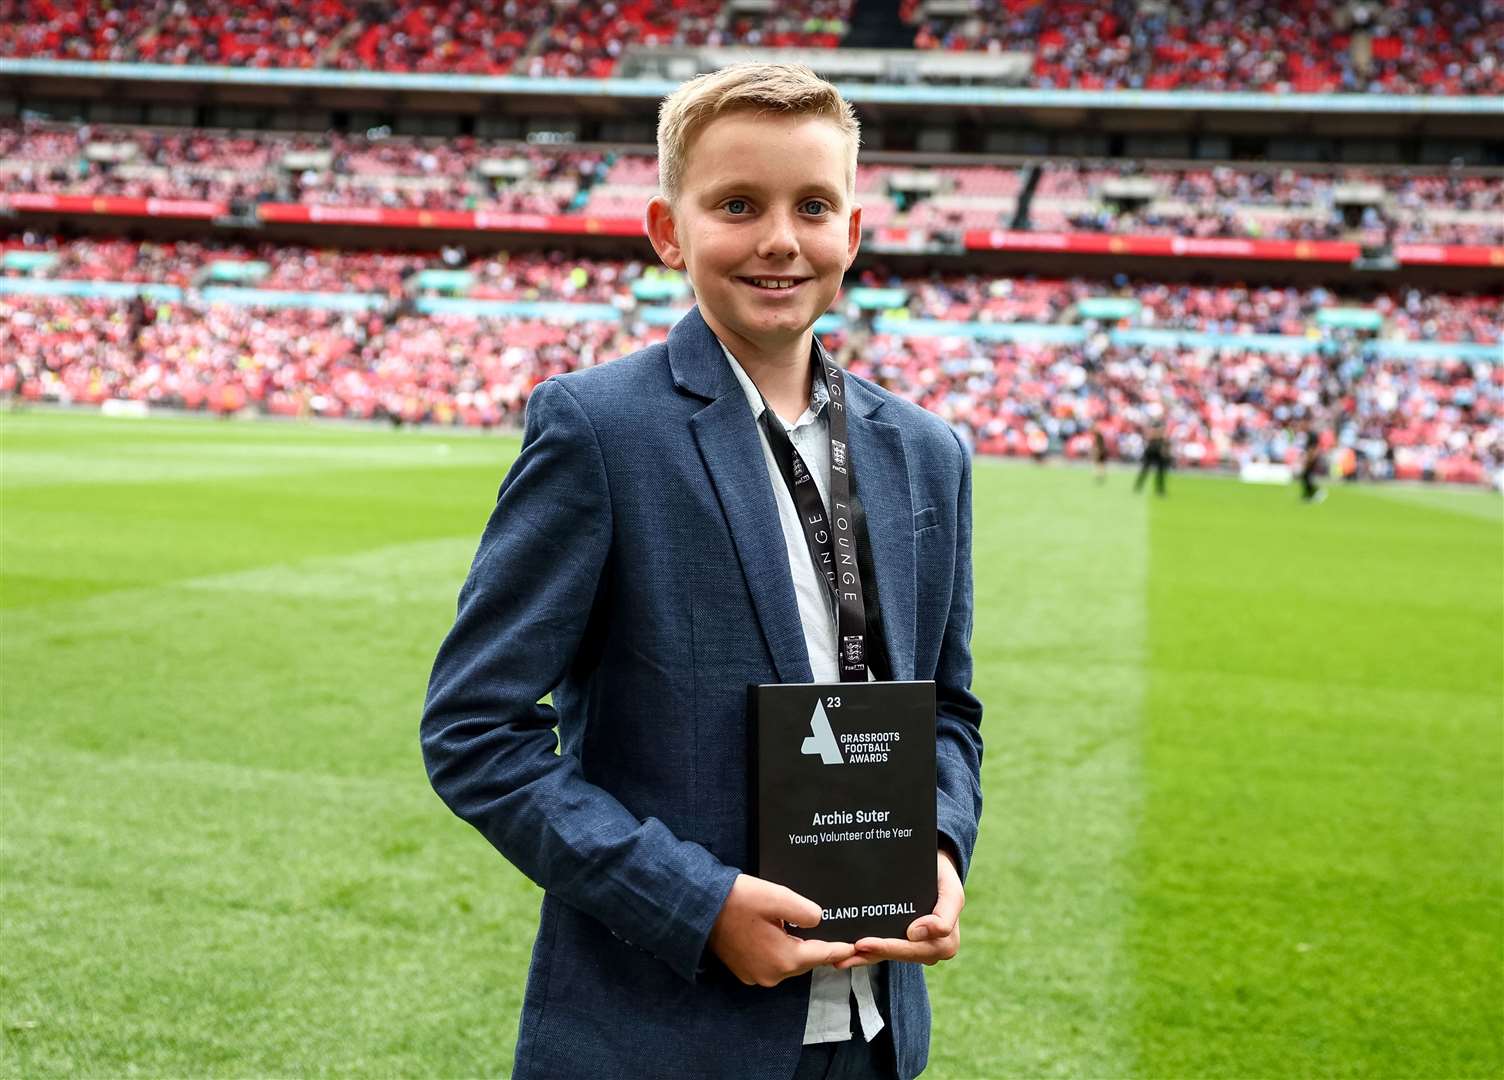 Teenager Archie Suter at Wembley during The FA Community Shield match between Manchester City and Arsenal. Photo: Michael Regan - The FA/The FA via Getty Images